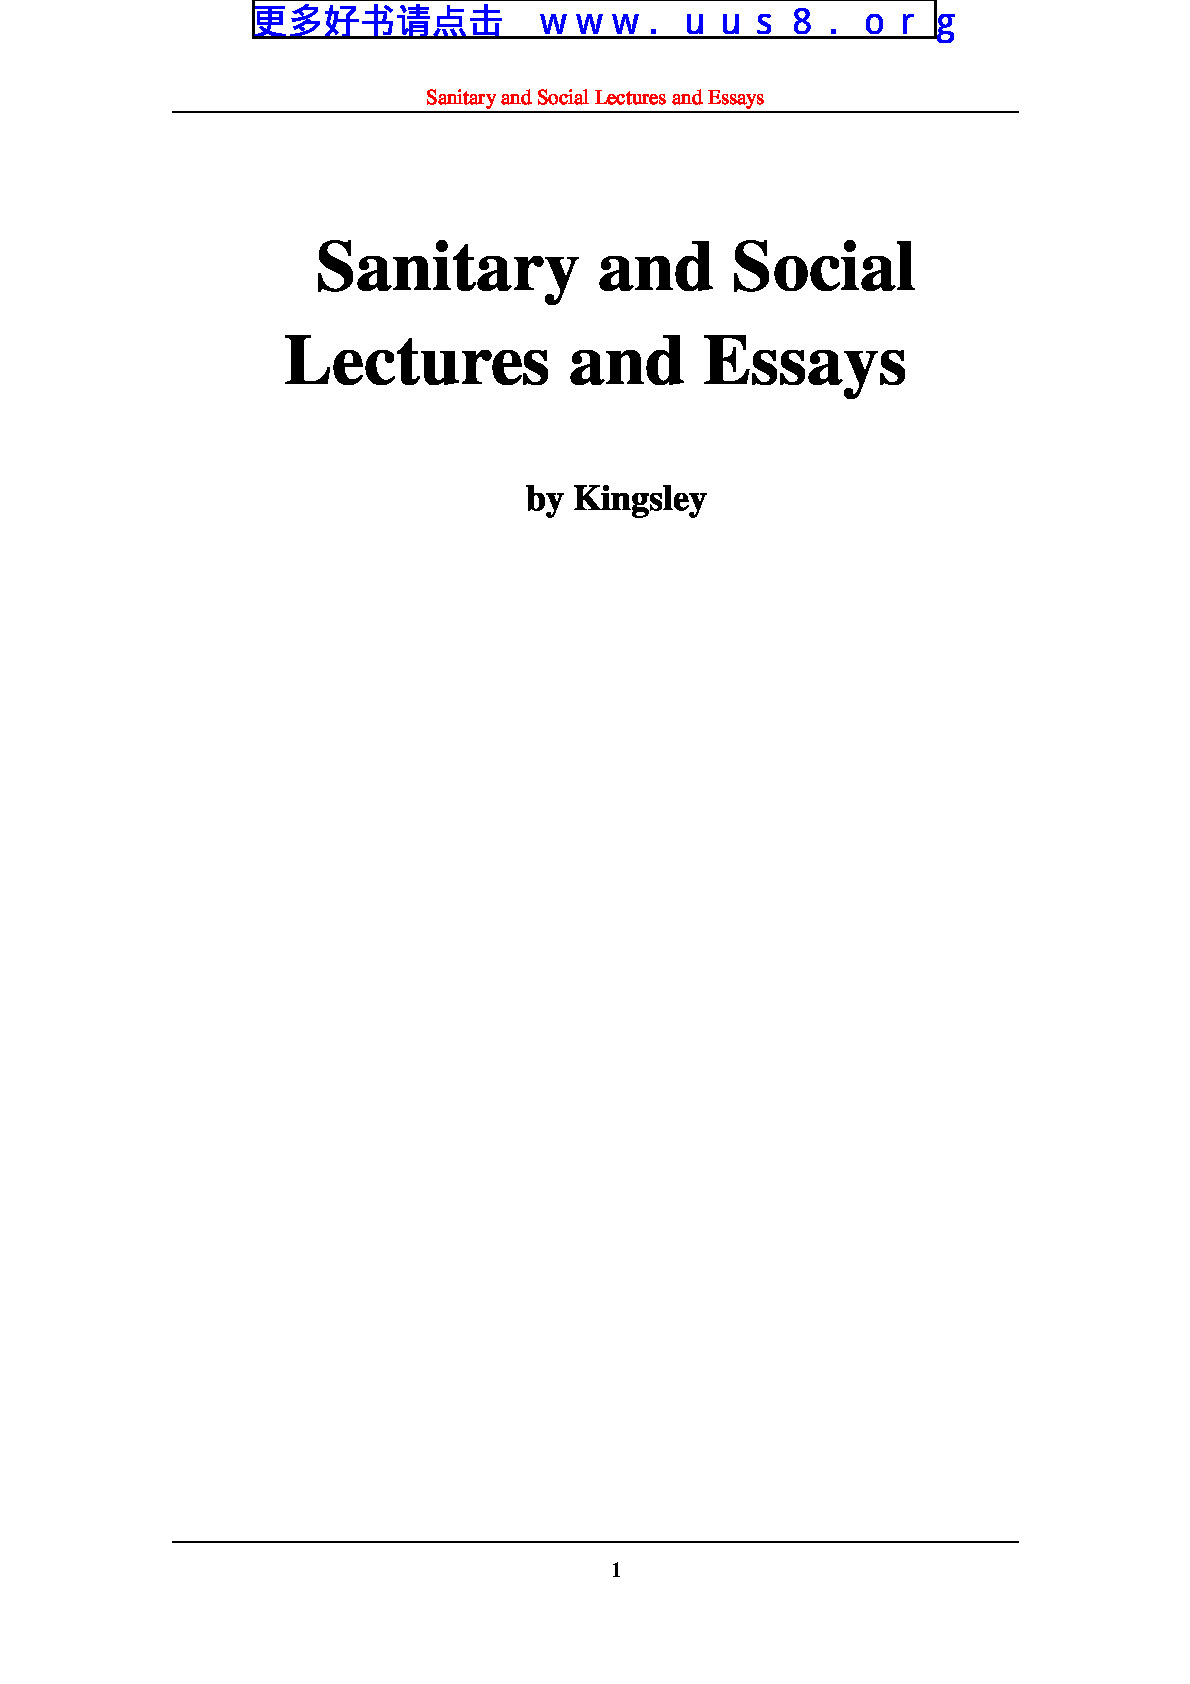 Sanitary_and_Social_Lectures_and_Essays(社会卫生讲座)